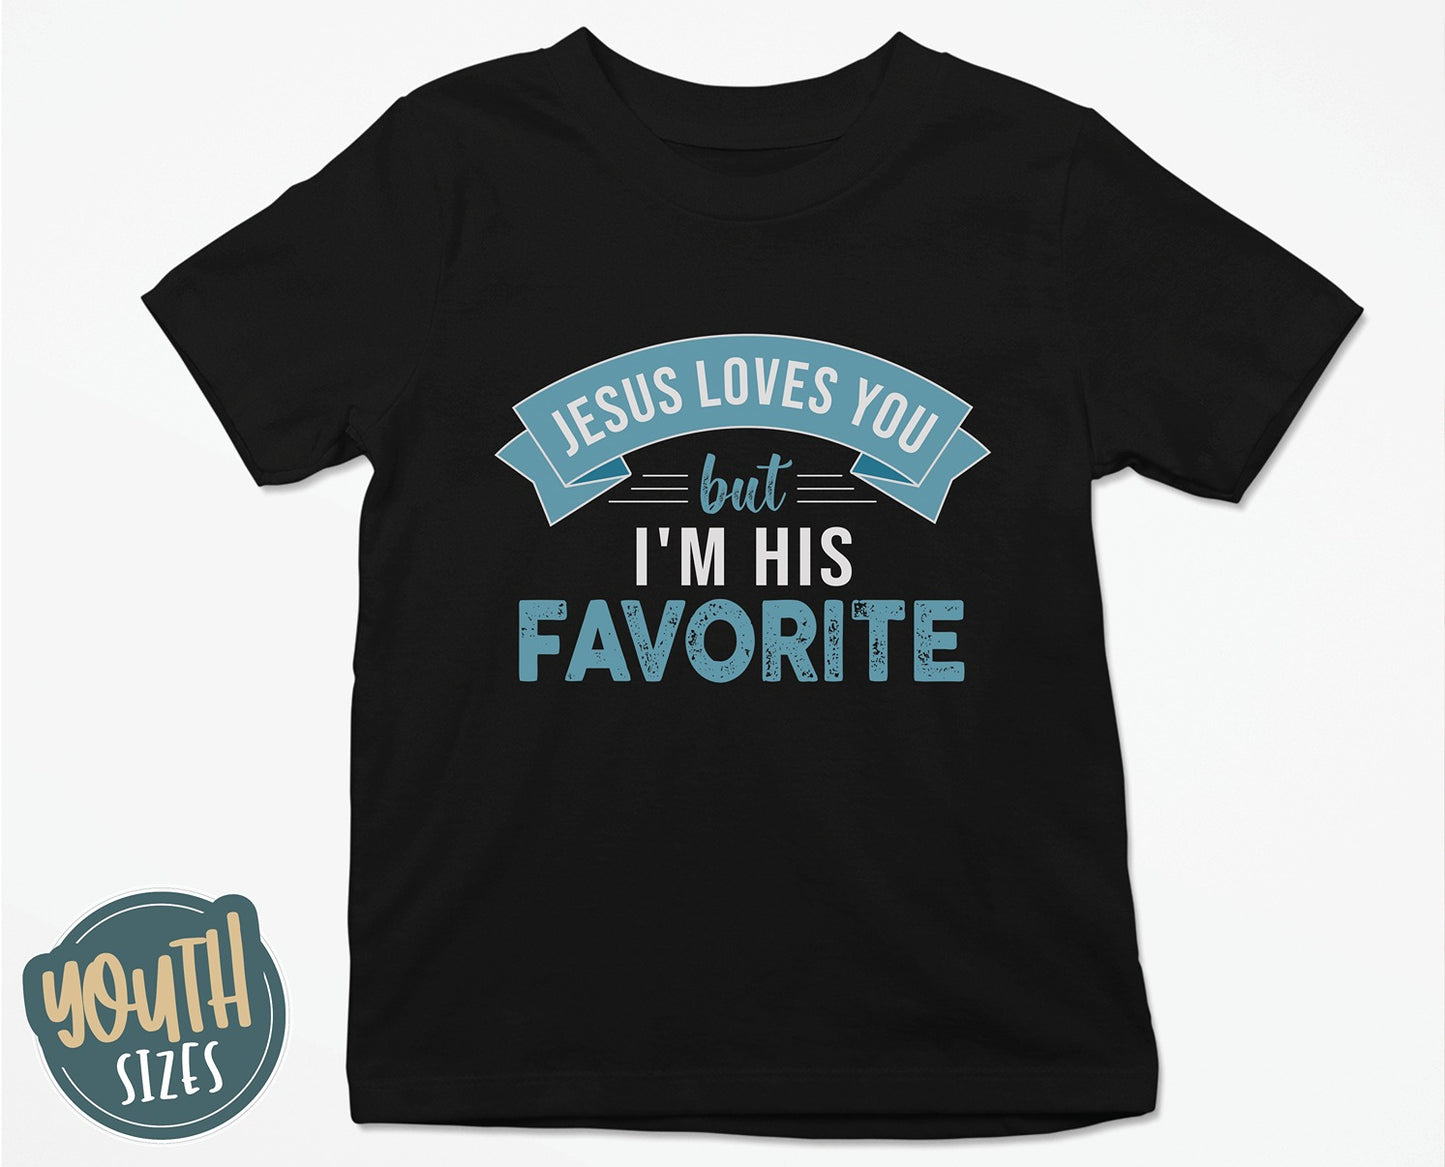 Jesus Loves You But I'm His Favorite funny Christian aesthetic youth size t-shirt printed in teal on soft black boys and girls kids tee